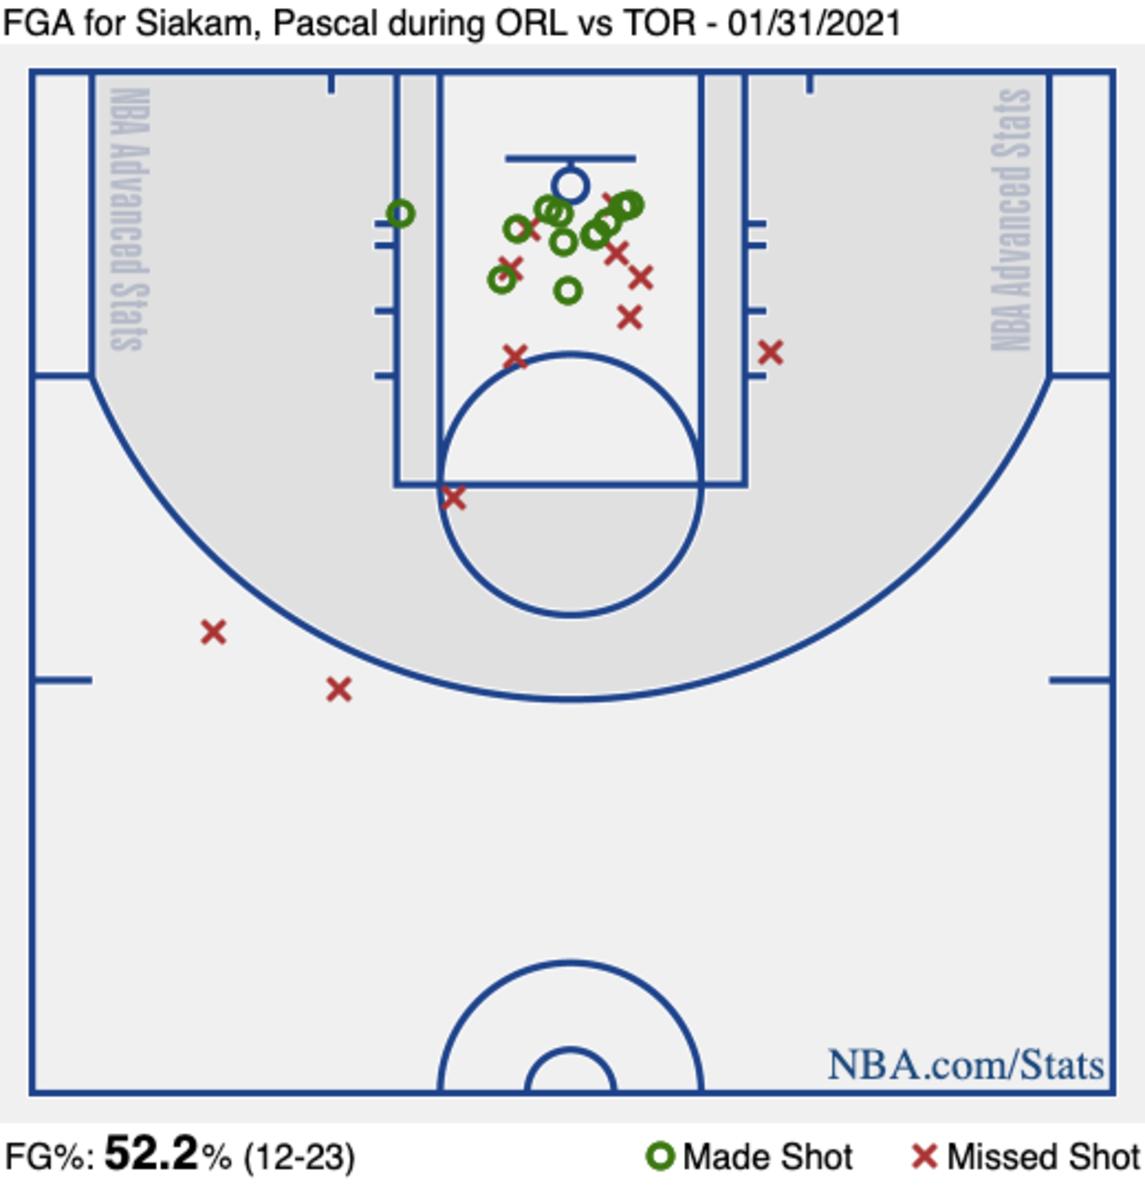 Pascal Siakam's shot chart from Sunday's game against the Orlando Magic